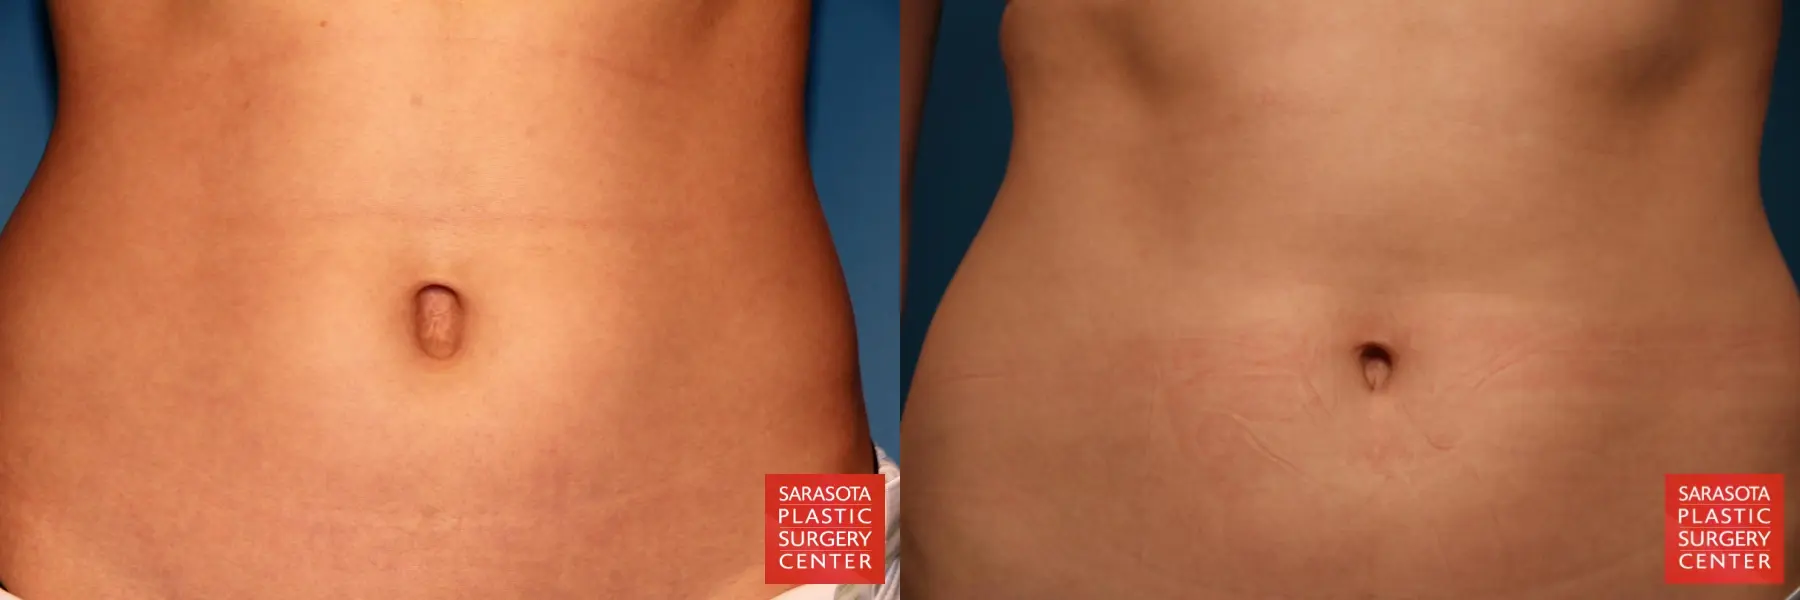 Umbilicoplasty: Patient 1 - Before and After  